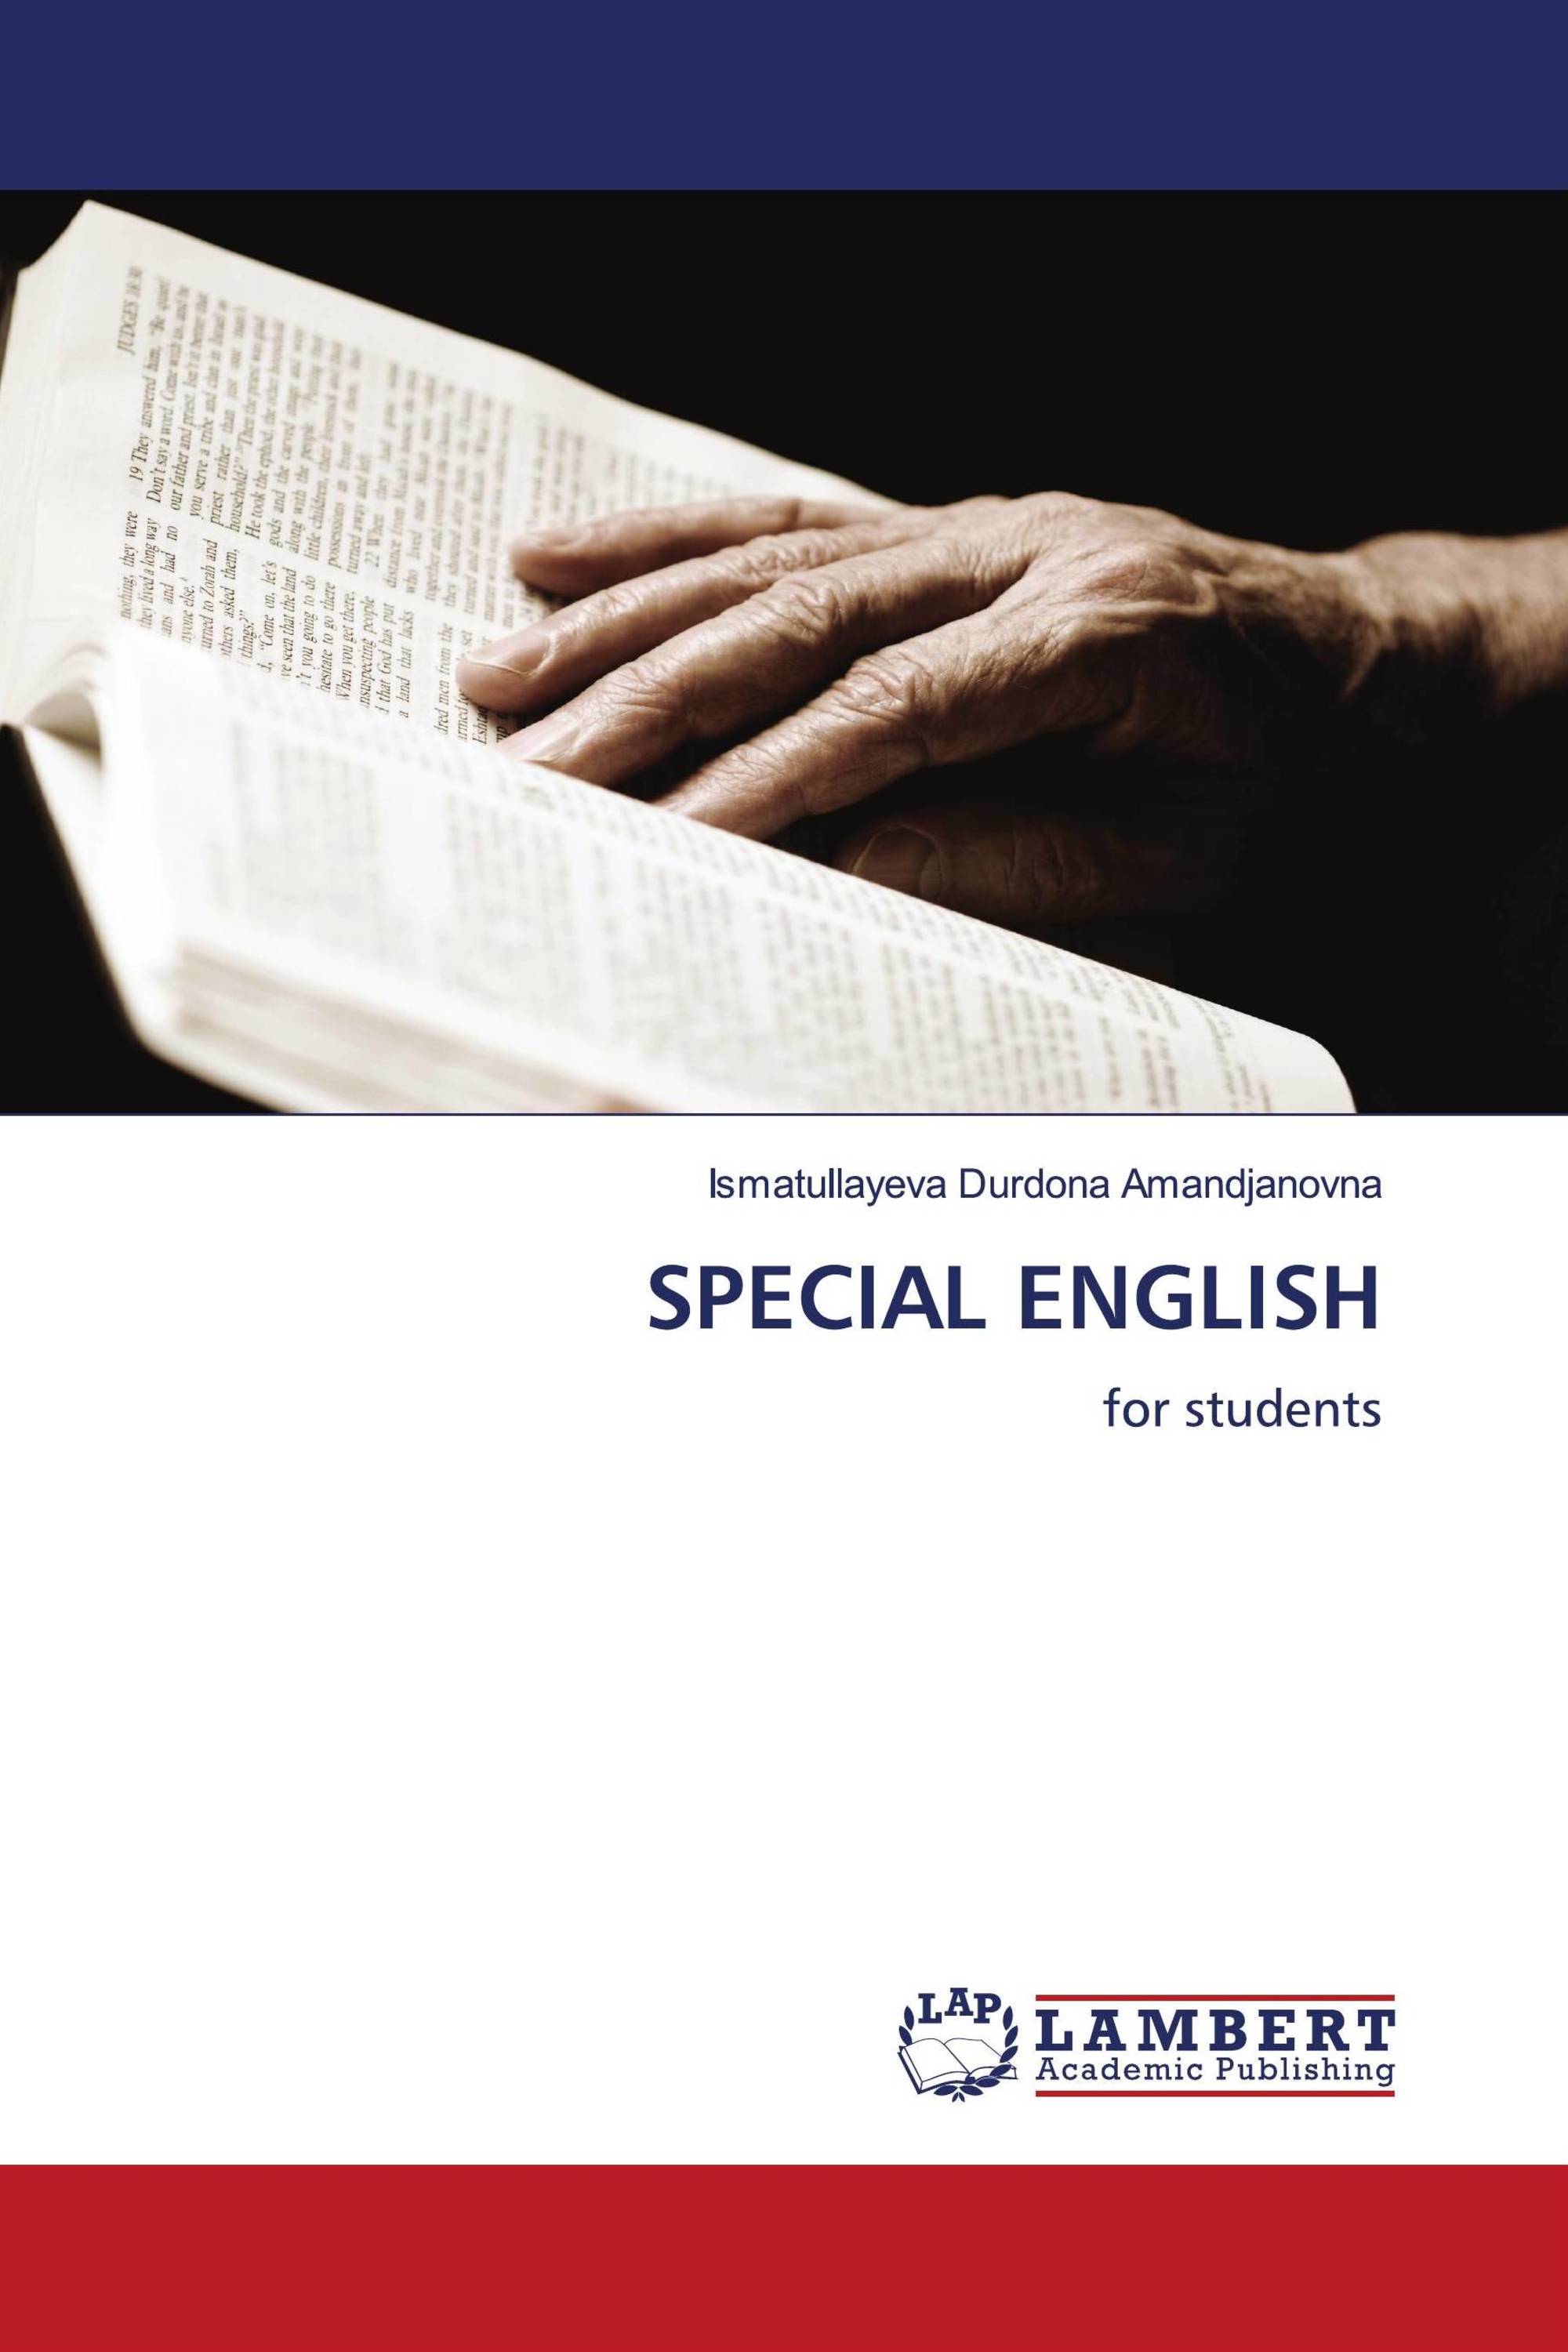 SPECIAL ENGLISH